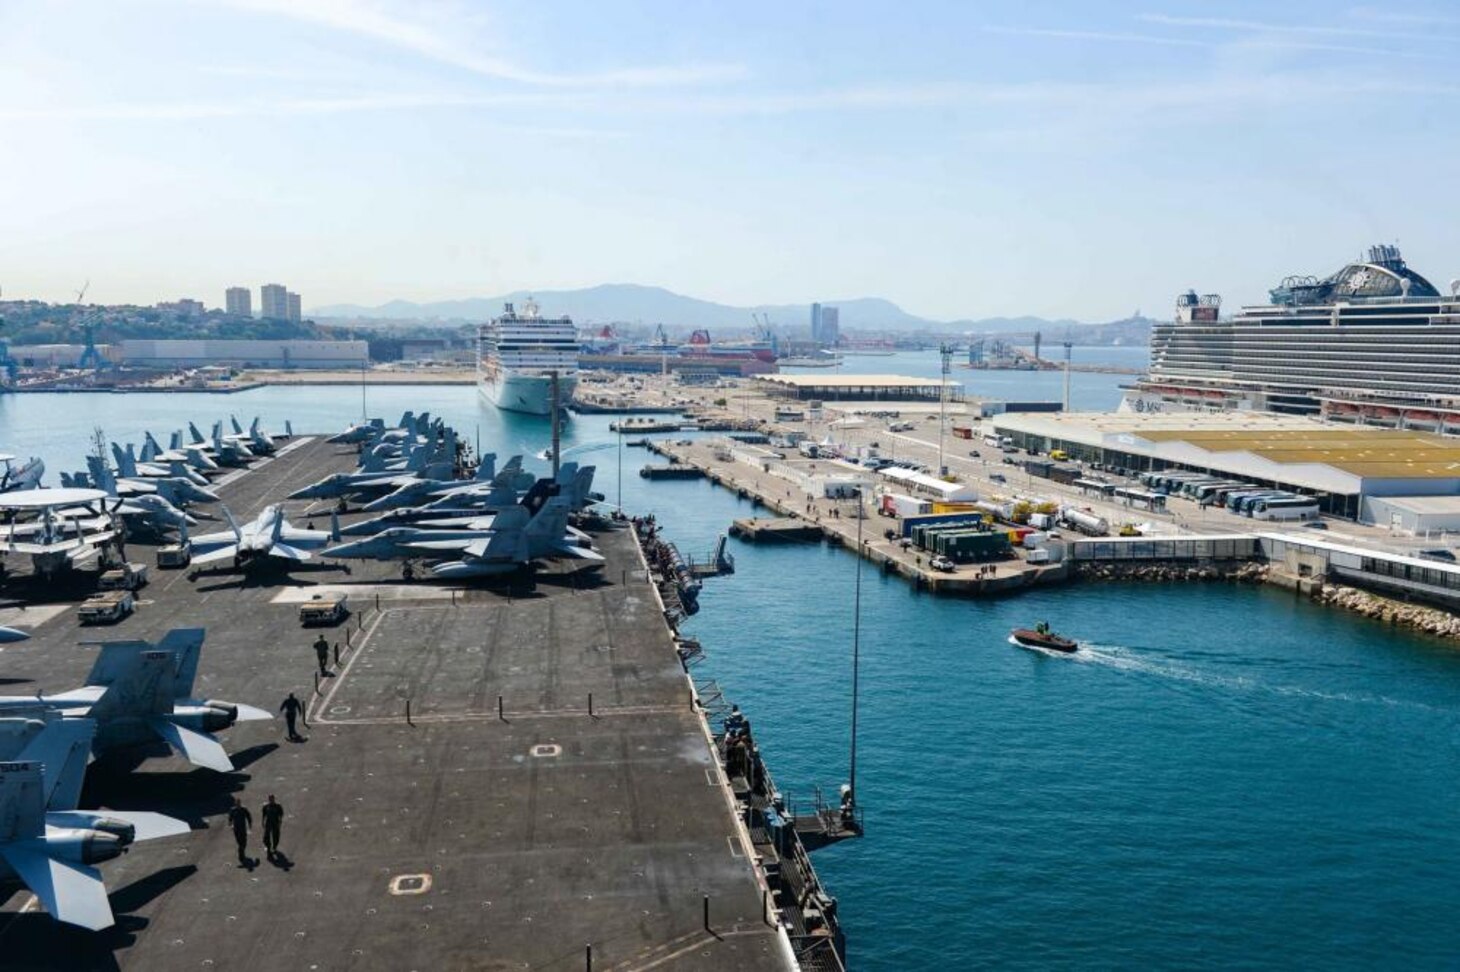 (June 18, 2022) USS Harry S. Truman (CVN 75) pulls into Marseille, France for a scheduled port visit, June 18, 2022. The Harry S. Truman Carrier Strike Group is on a scheduled deployment in the U.S. Naval Forces Europe area of operations, employed by U.S. Sixth Fleet to defend U.S., allied and partner interests.